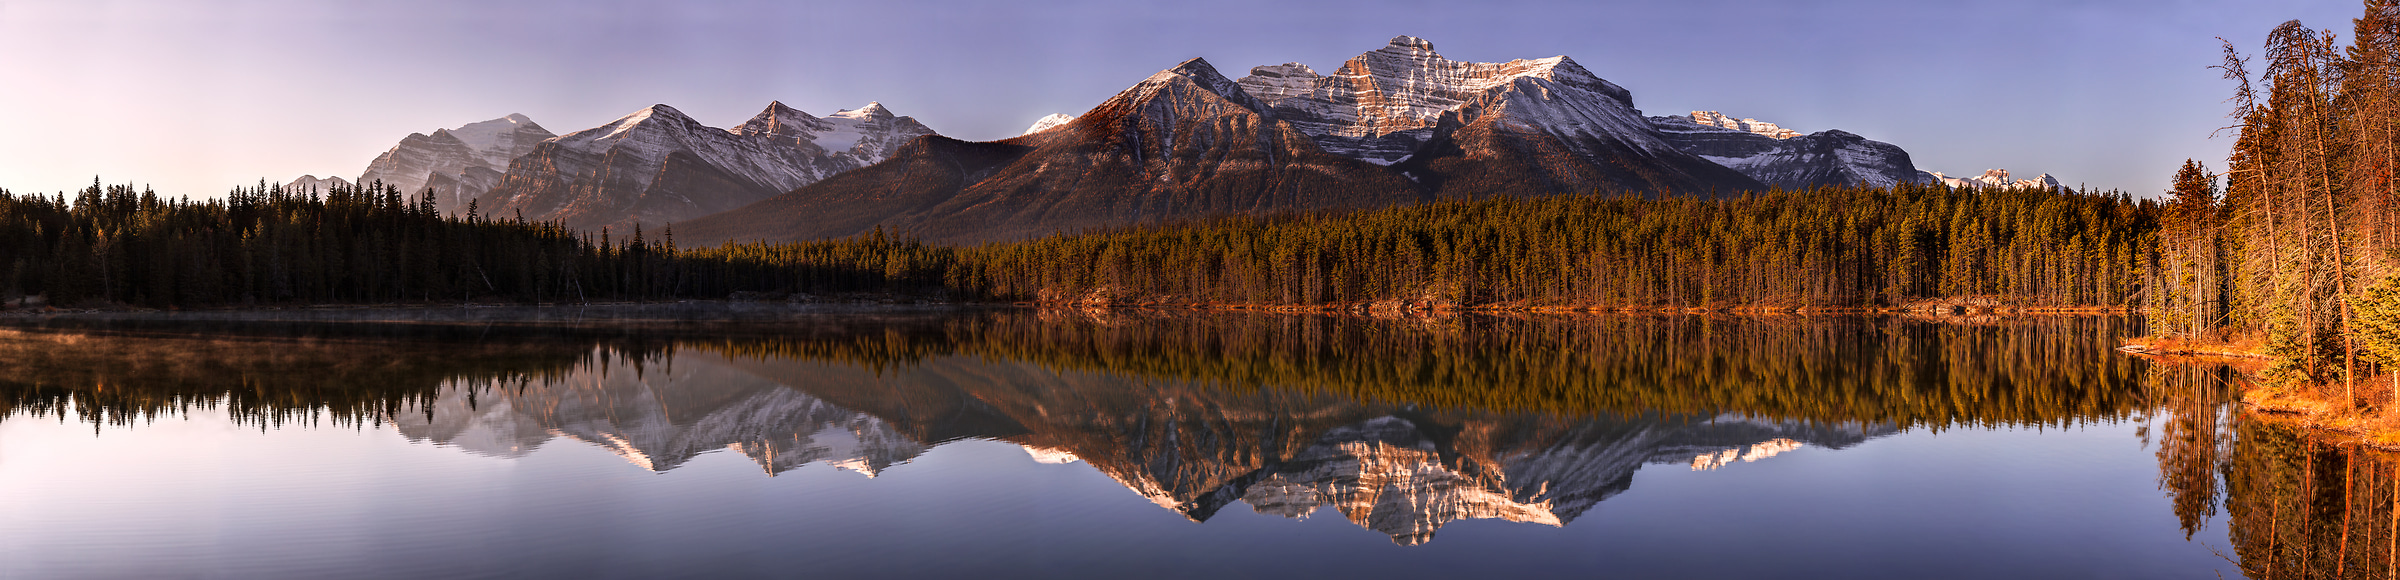 273 megapixels! A very high resolution, large-format VAST photo print of a panorama landscape; photograph created by Chris Collacott in Herbert Lake, Alberta, Canada.